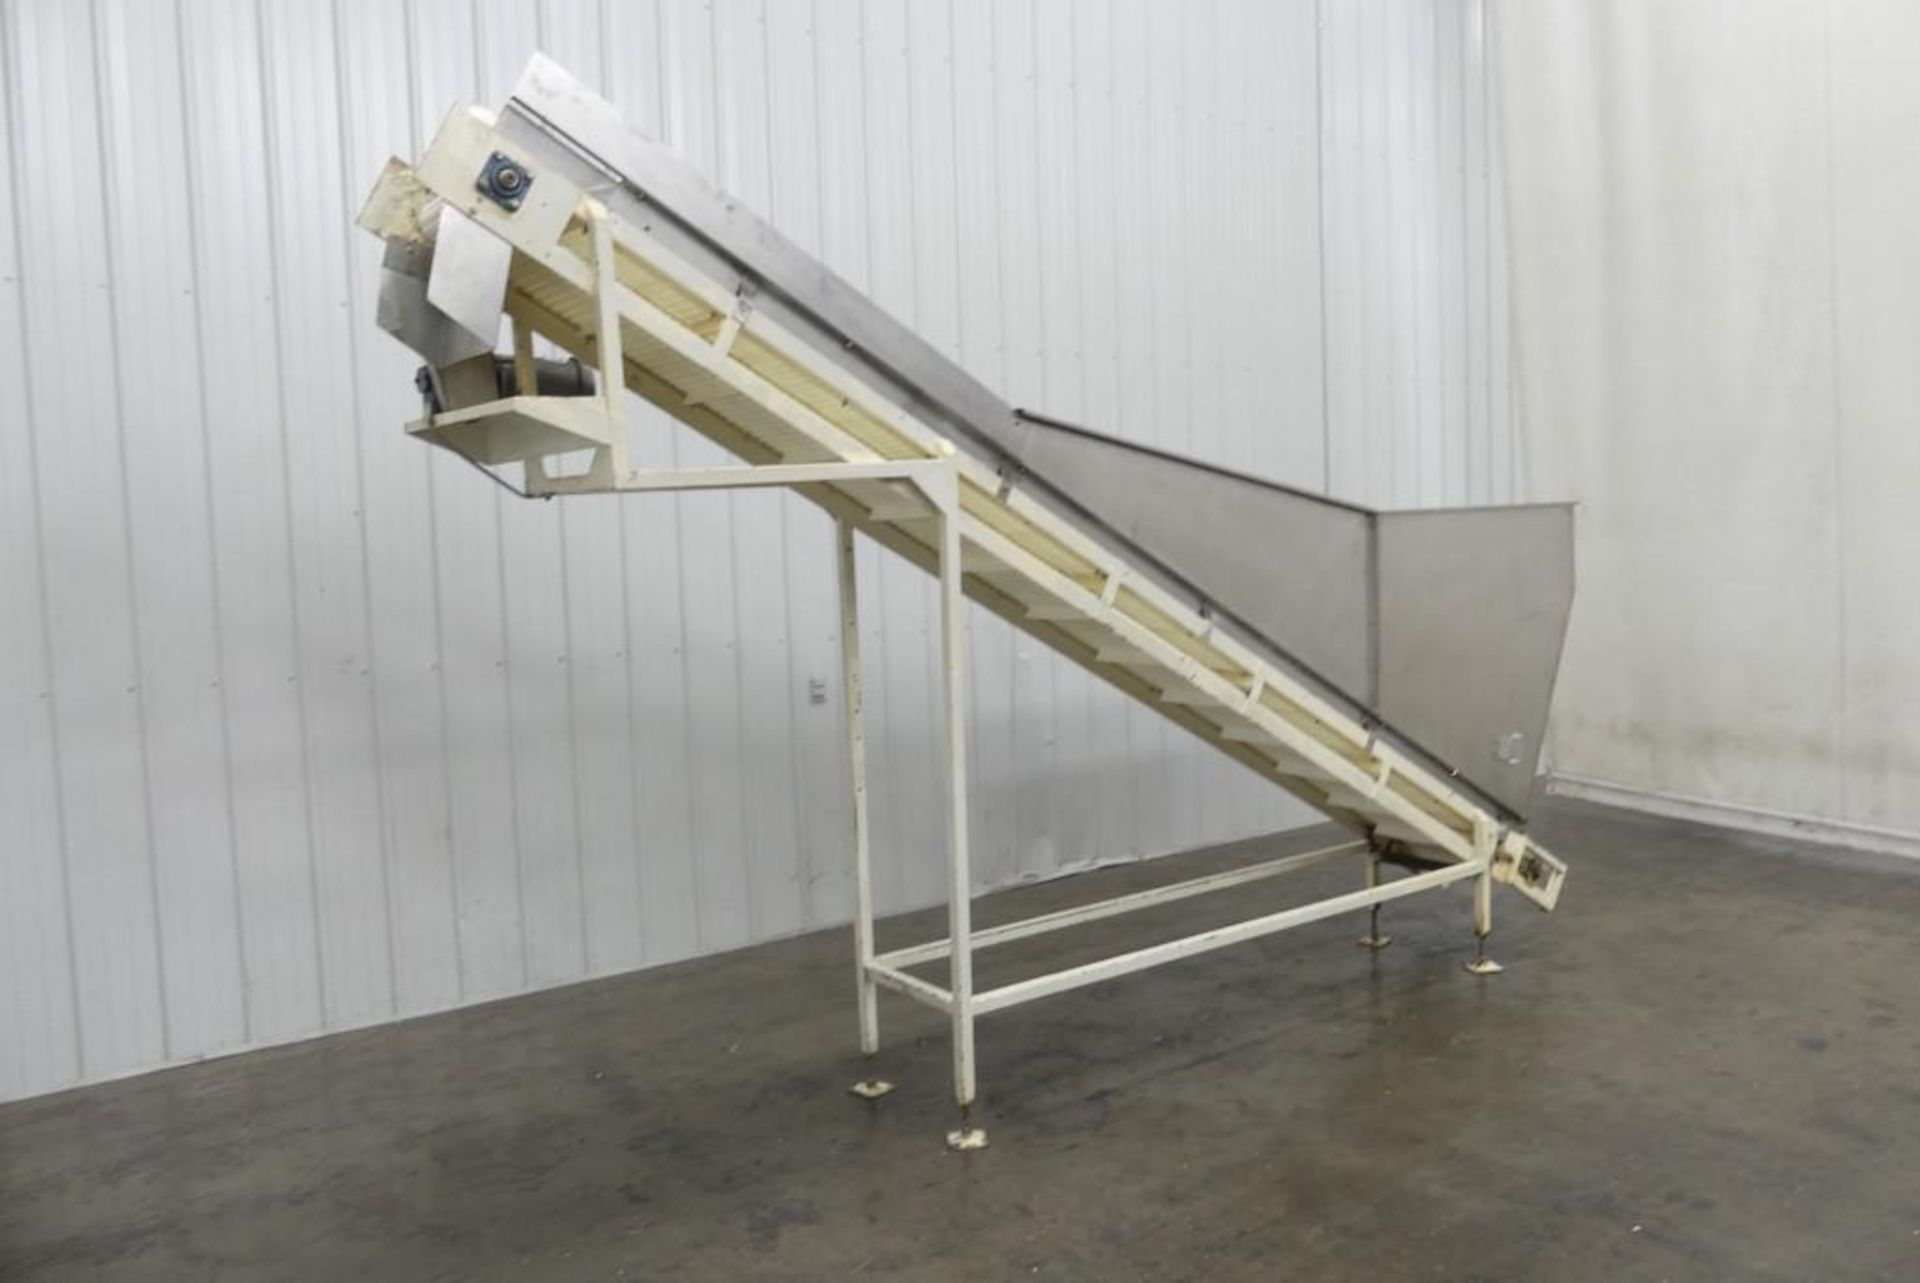 Cleated Incline Conveyor with Hopper 16" Wide - Image 2 of 11